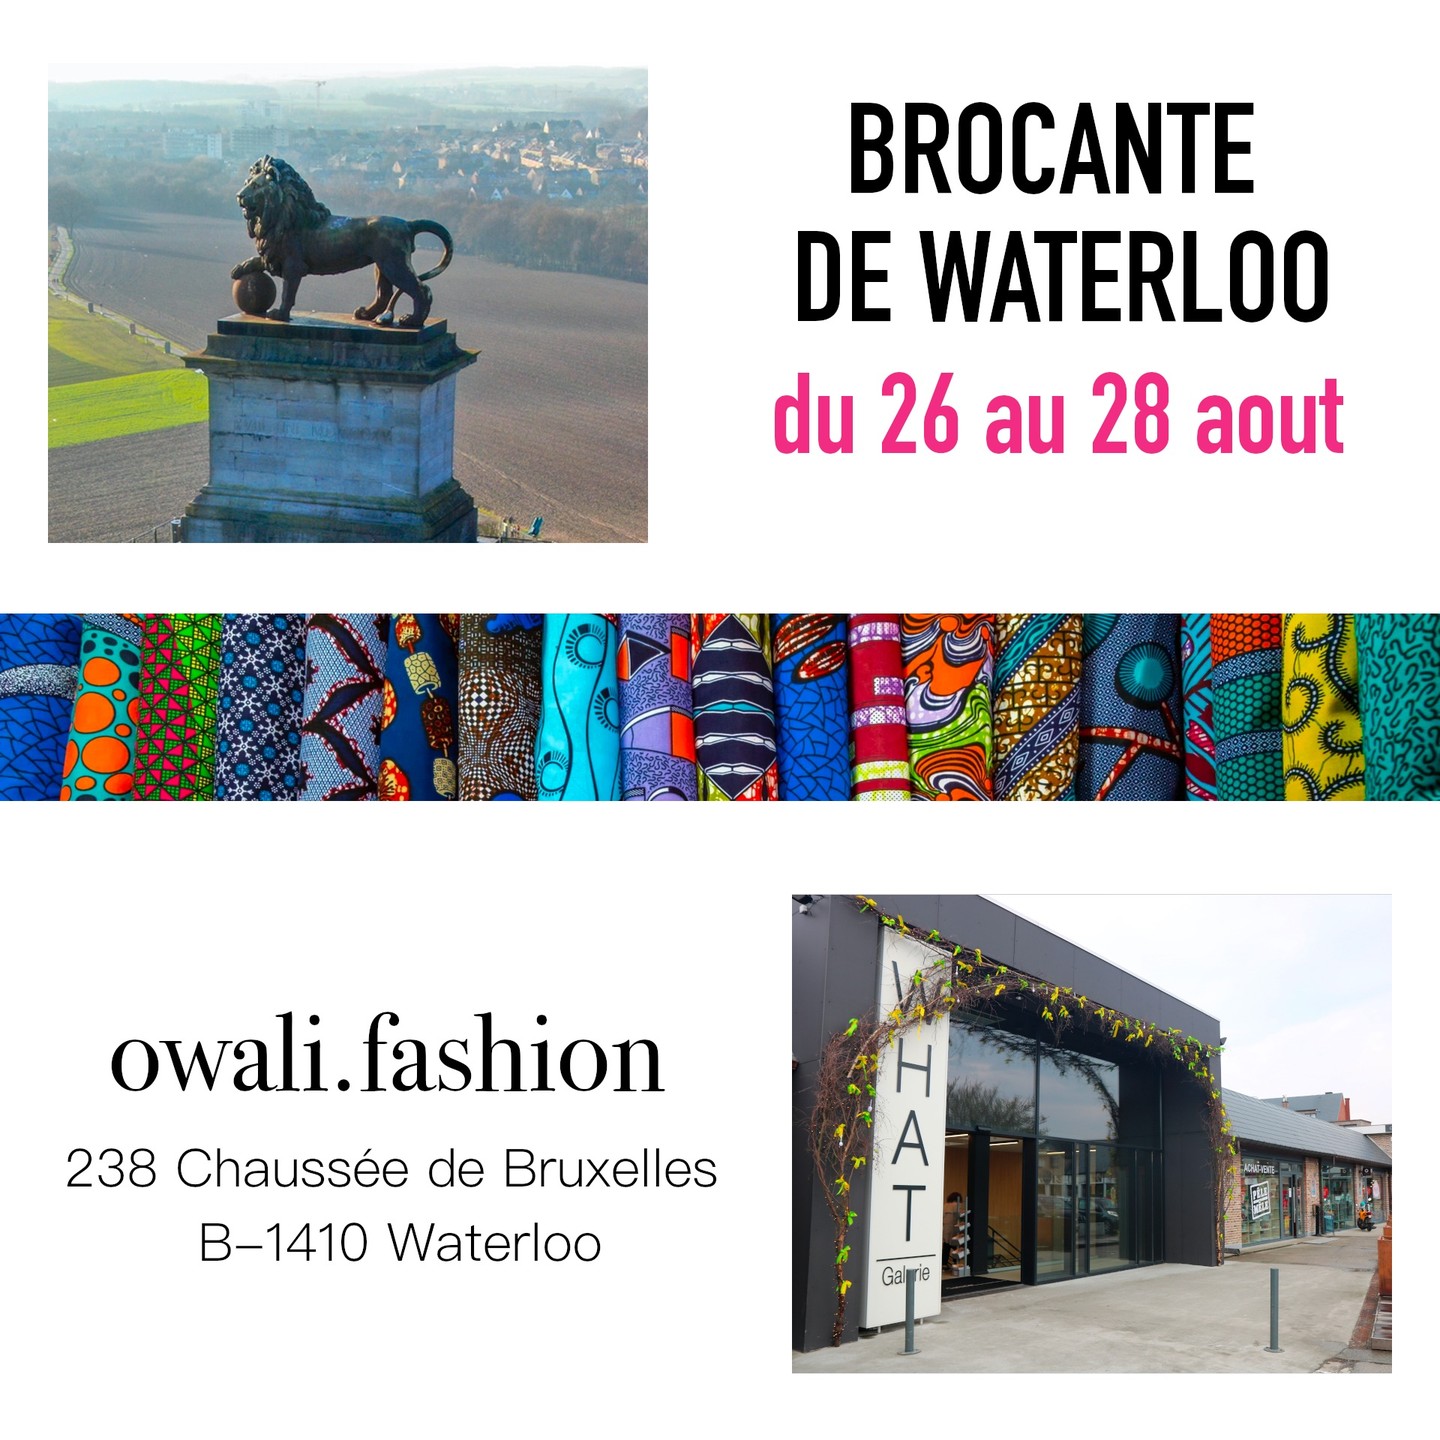 This weekend from the 26th to the 28th of August let's join together at the brocante of Waterloo. The shop will be exceptionally open on Sunday and you will be able to see, touch and escape for a weekend in the heart of Walloon Brabant!
----
Ce weekend du 26 au 28 août retrouvons-nous à la brocante de Waterloo. Le magasin sera exceptionnellement ouvert dimanche et vous pourrez voir, toucher et vous évader le temps d'un weekend au coeur du Brabant wallon!!
.
.
.
.
.
.
#waterloobrocante #owali #owalifashion #waterloo #womenempoweringwomen
#owali #owalifashion #belgiumbrand #ikkoopbelgisch #handbag #maasaisandal #sacamain #handtas #style #mode #accessories #handmade #handcraft #design #shopping #kooplokaal #smallbusiness #belgischemode #belgiumbased
#springsummer #couture